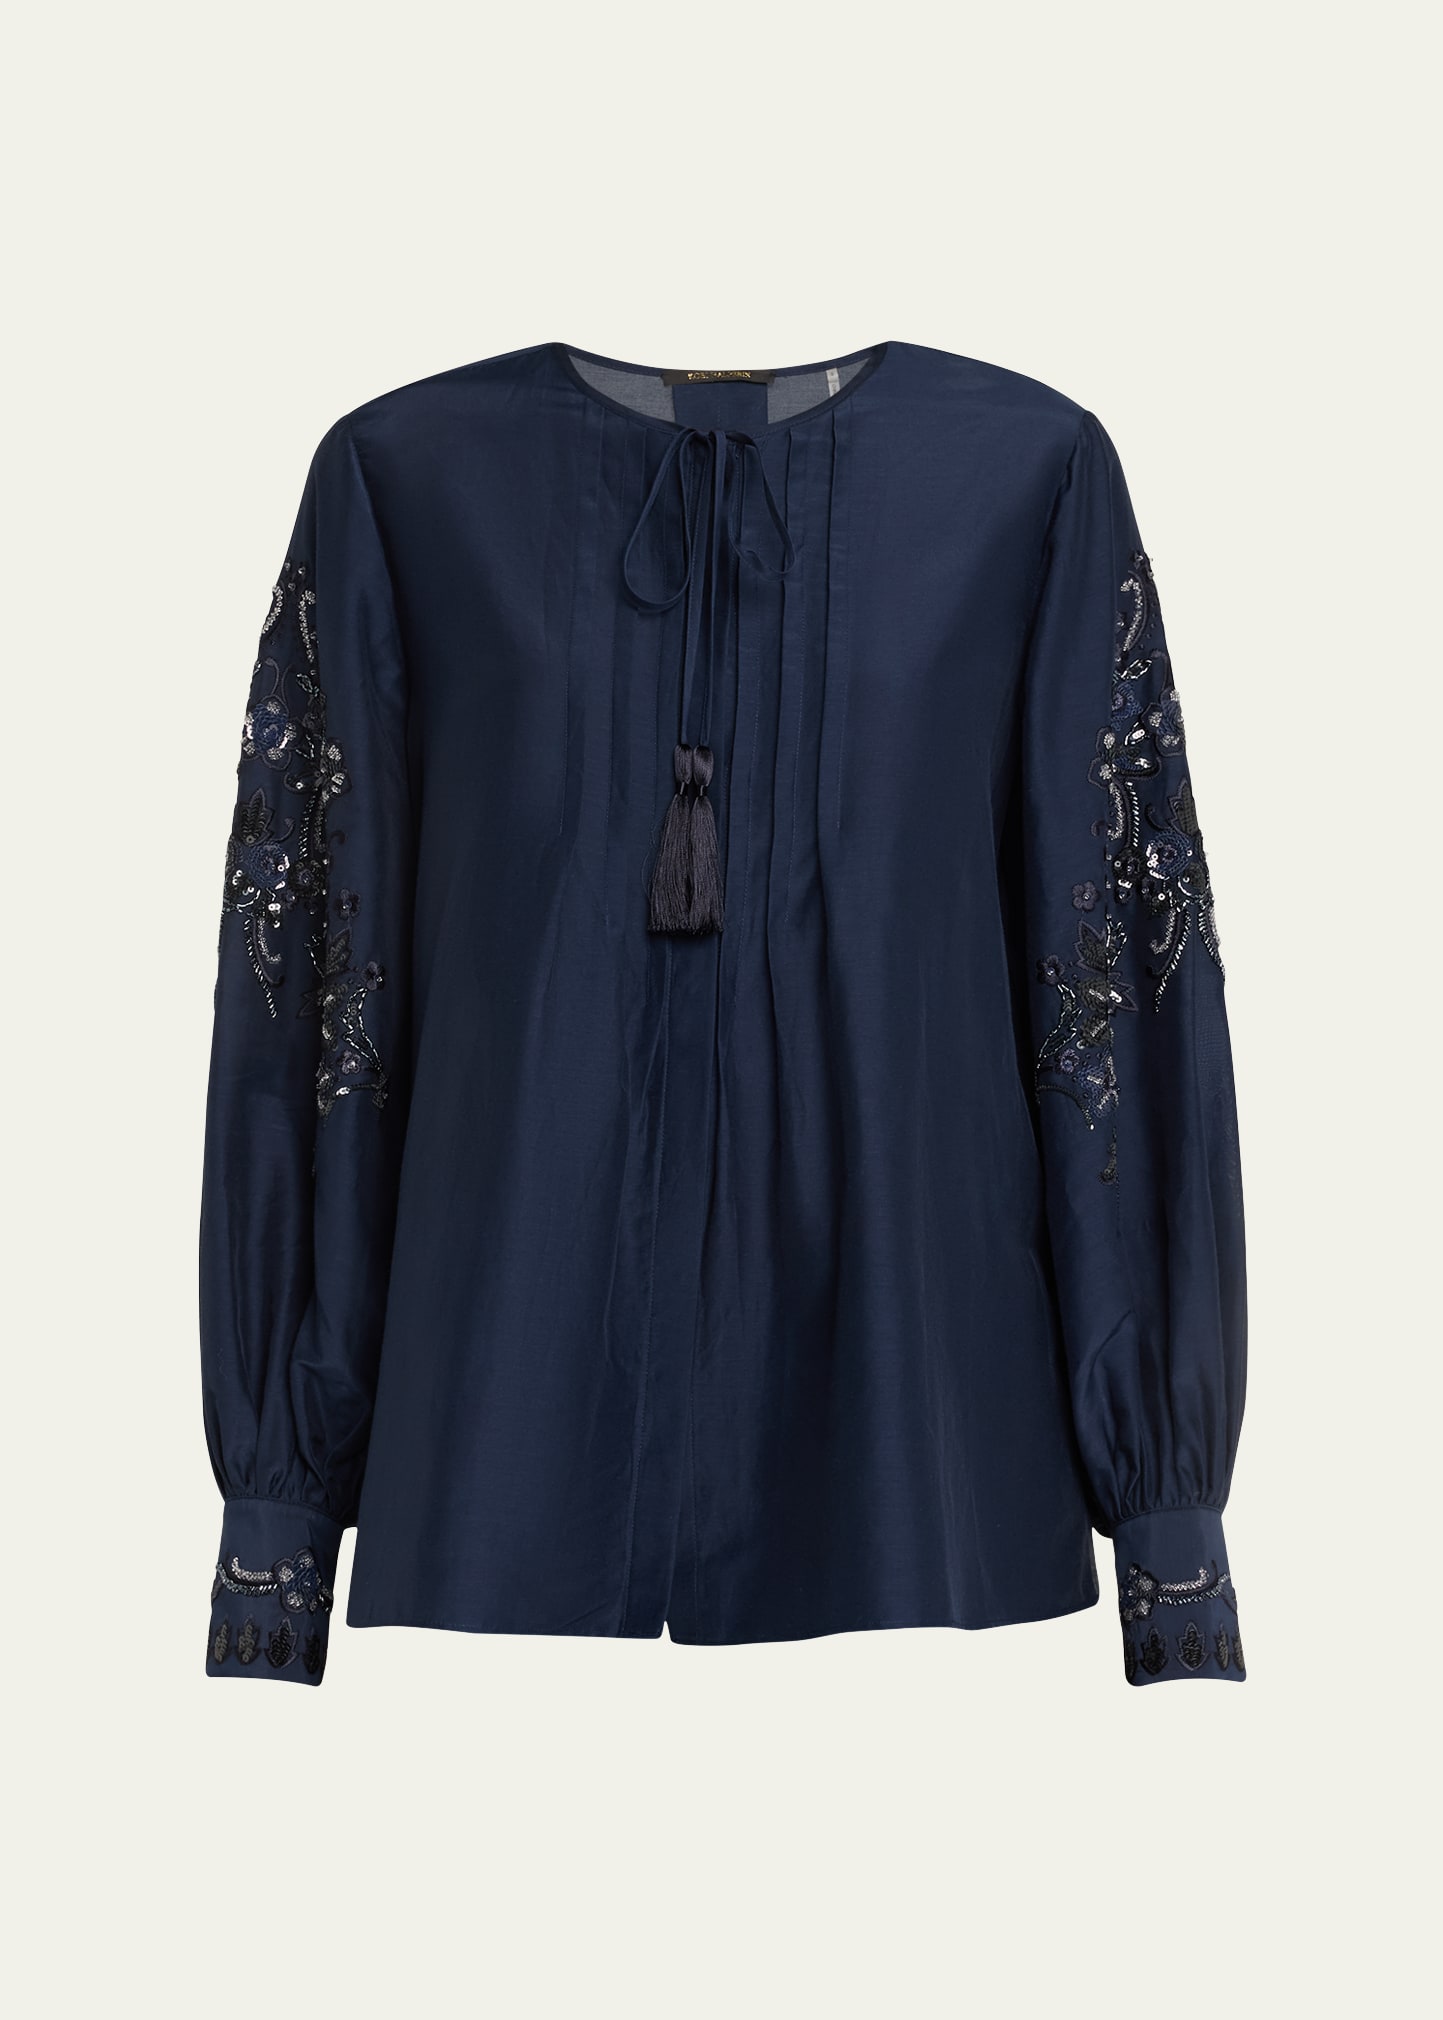 Kobi Halperin Acacia Sequin Floral-embroidered Blouse In Navy